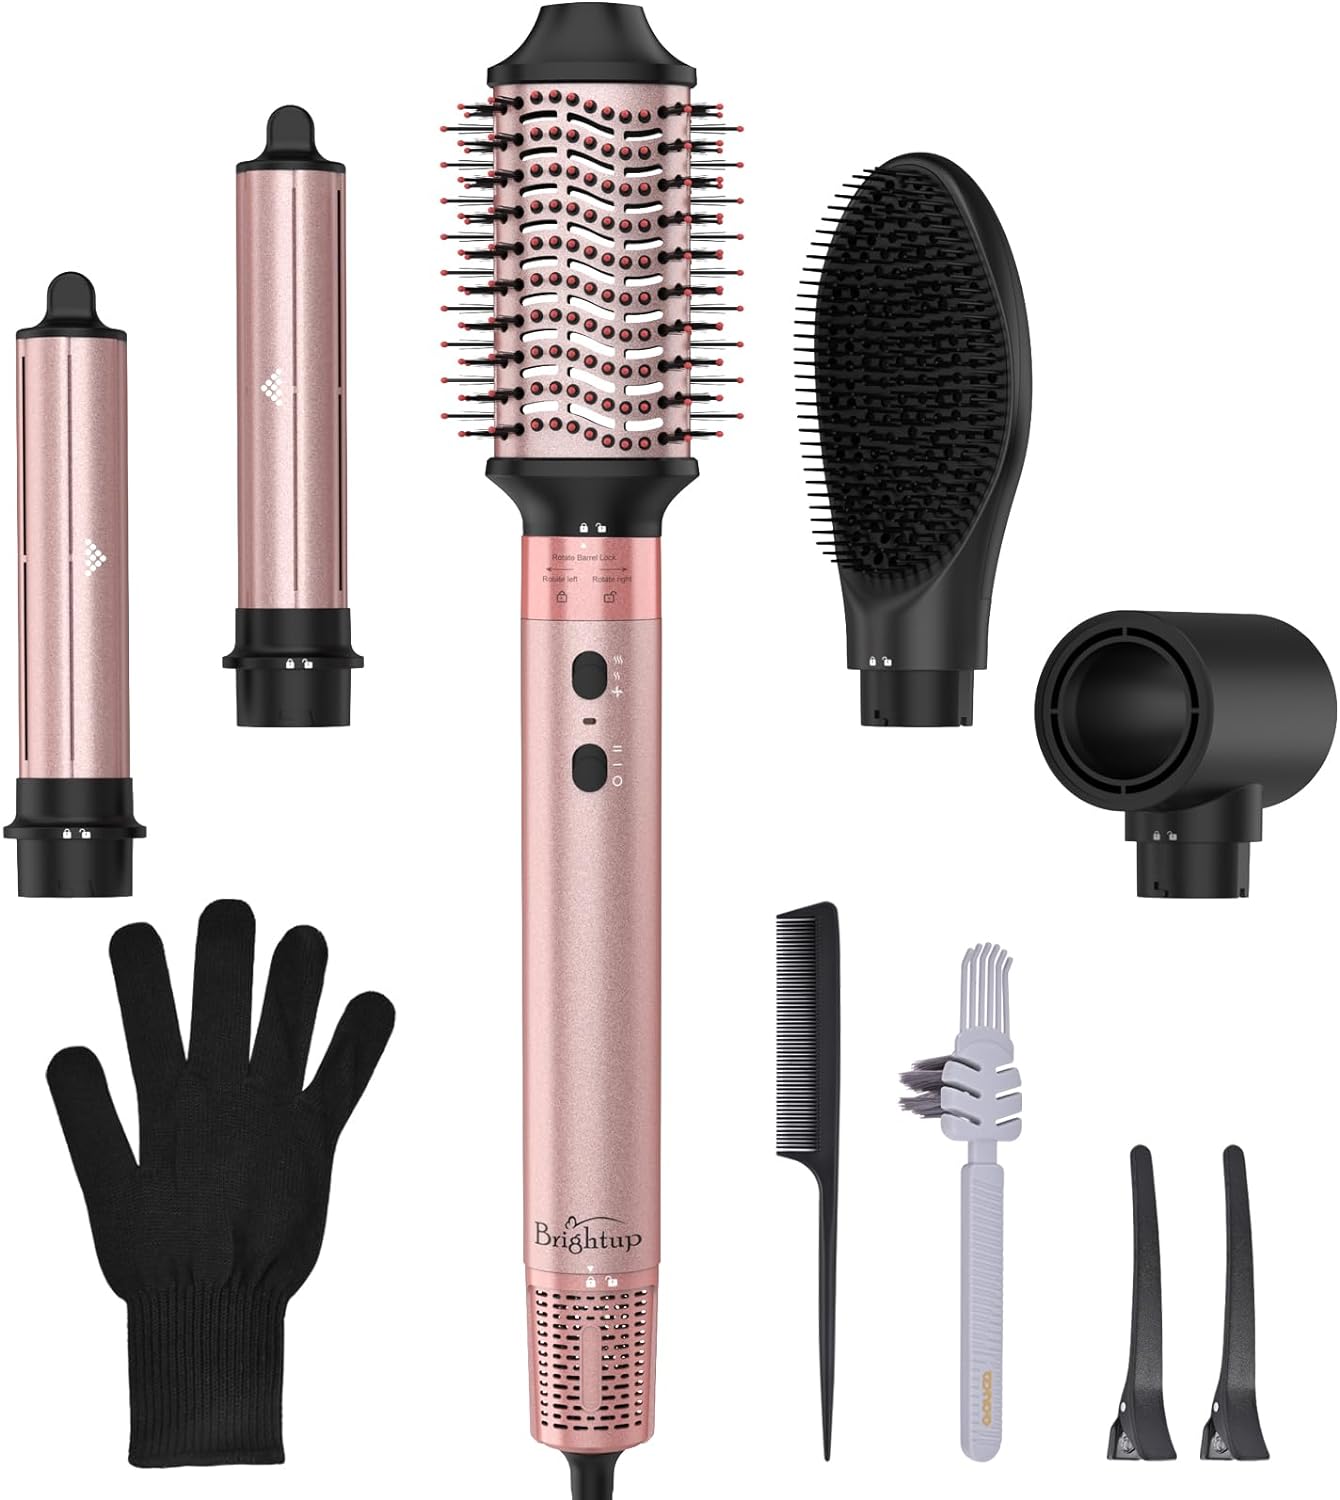 Brightup Hair Dryer Brush with 110,000 RPM High-Speed Negative Ionic Blow Dryer, Automatic Curling Iron, 5 in 1 Professional Hot Air Styler for Fast Drying Curling Volumizing Straightening & Styling